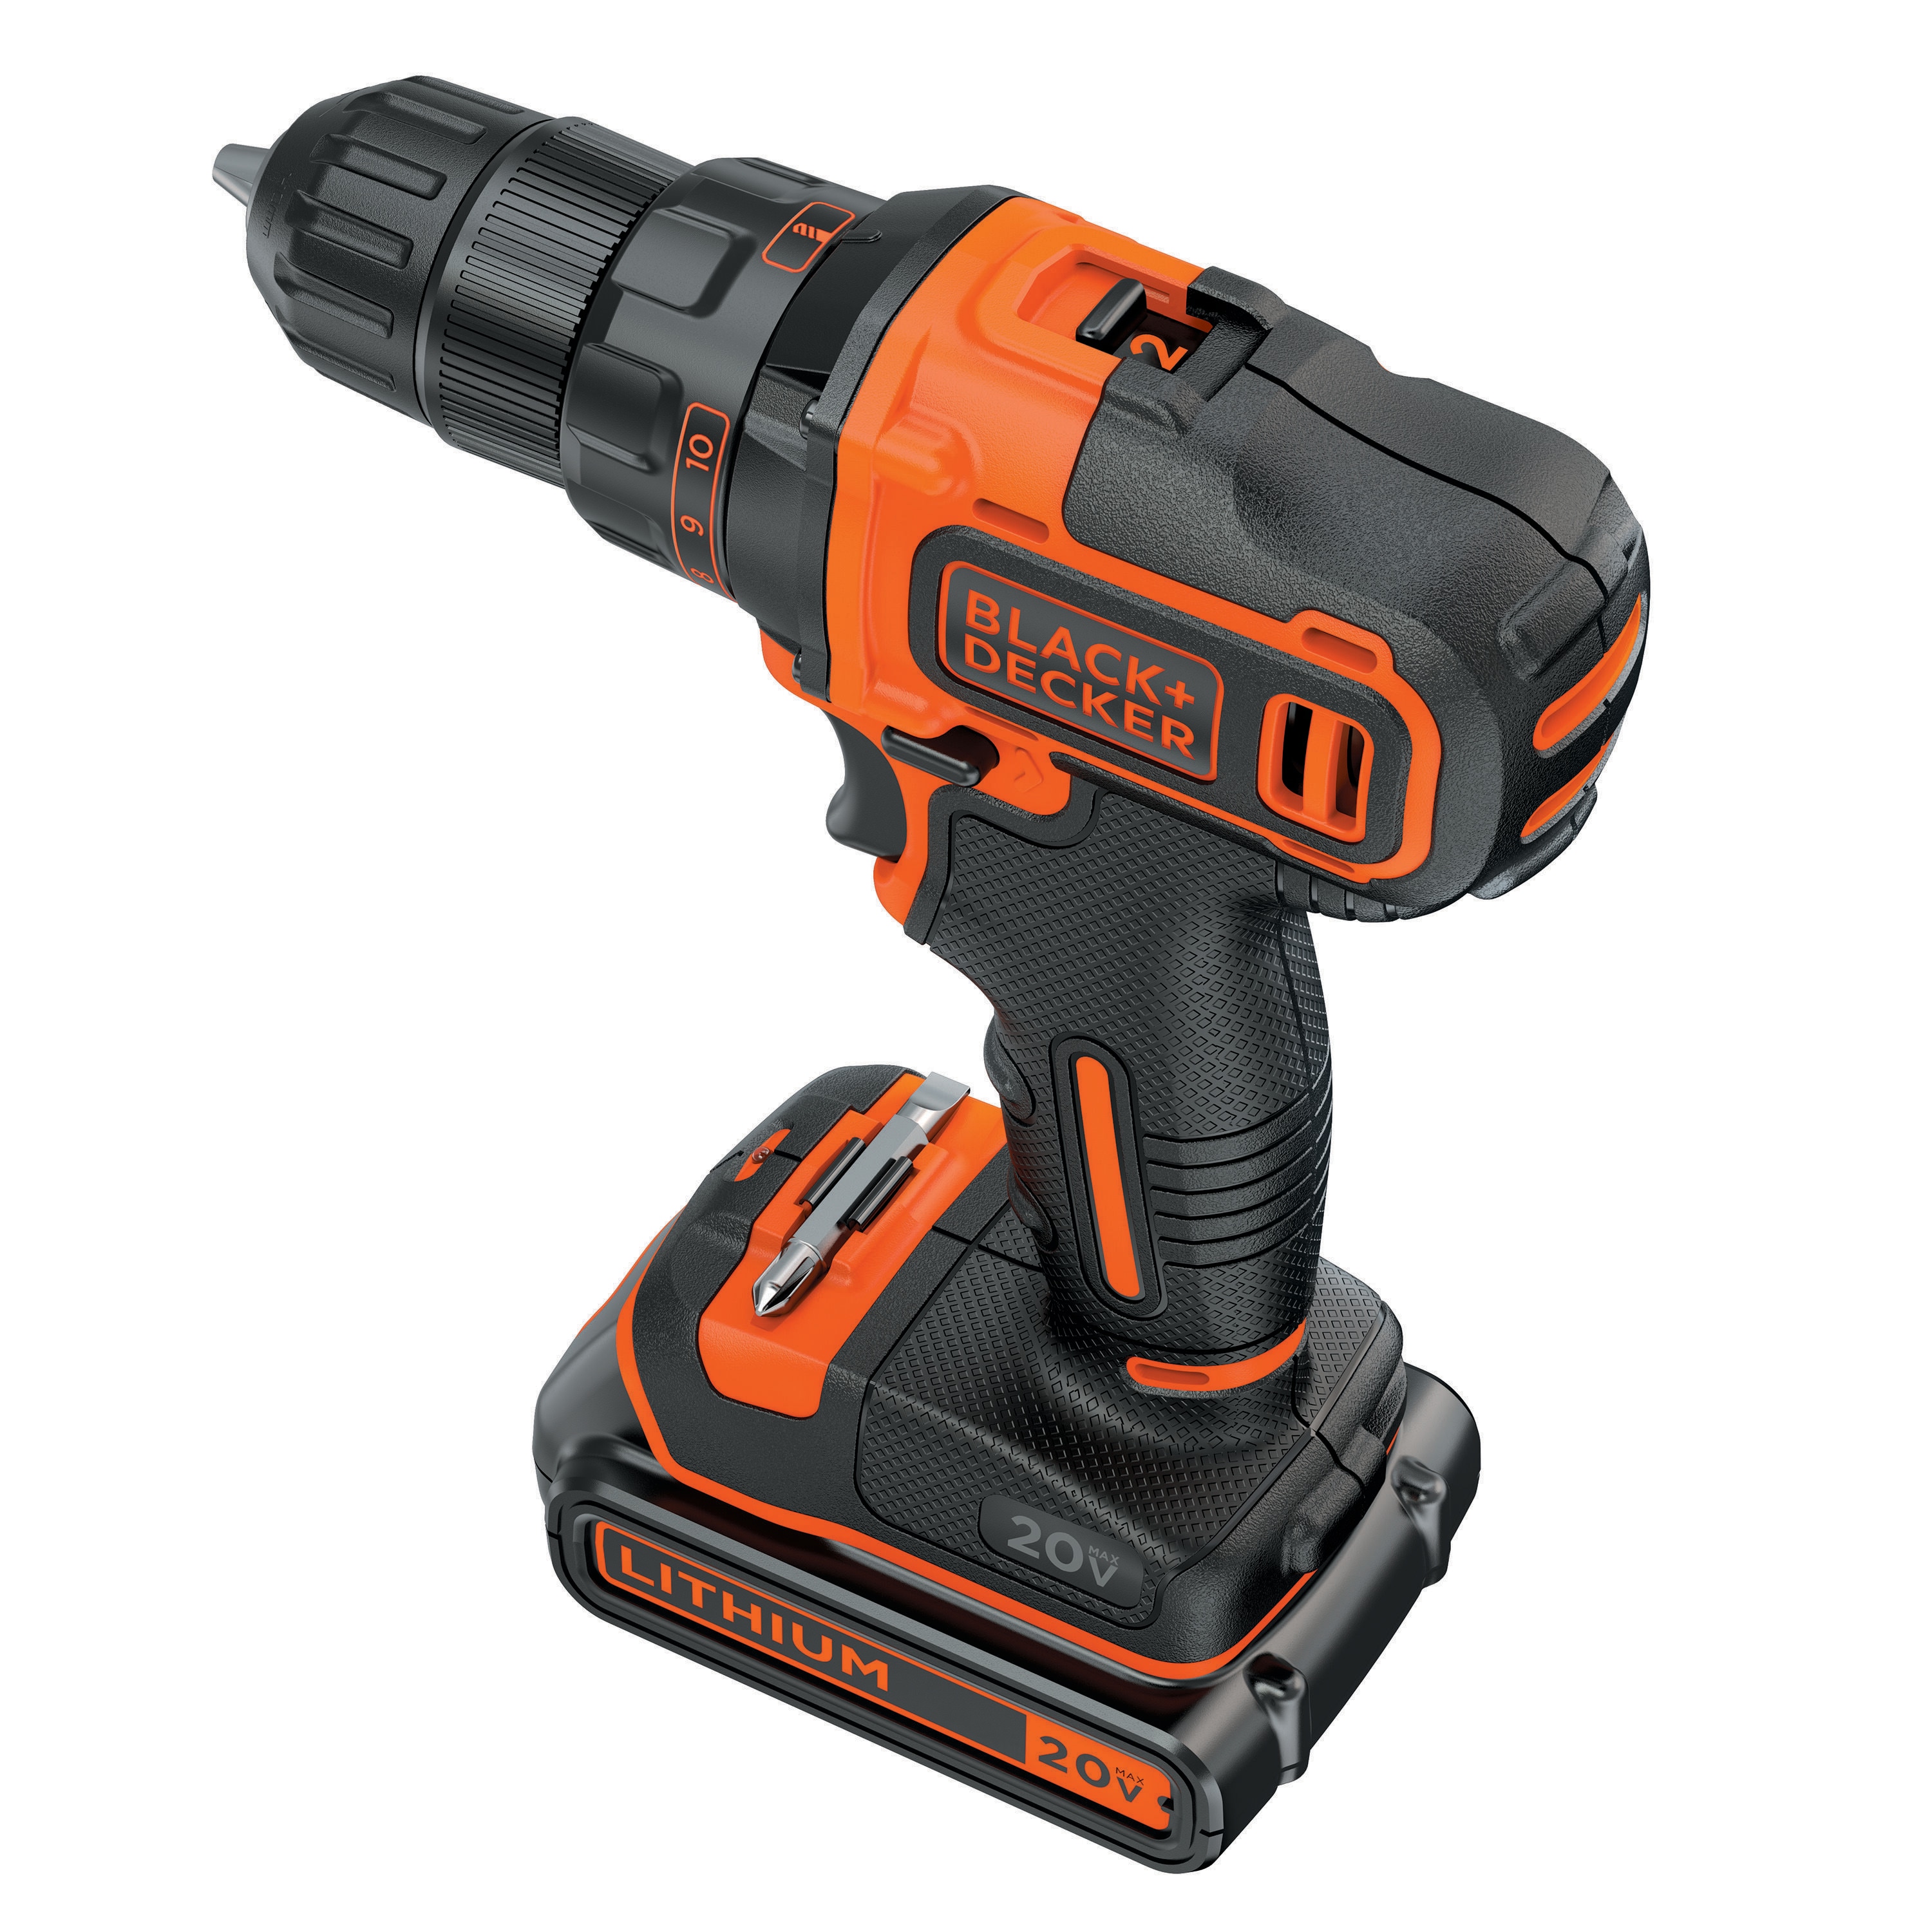 Black Decker Max Cordless Drilldriver - Get Best Price from Manufacturers &  Suppliers in India